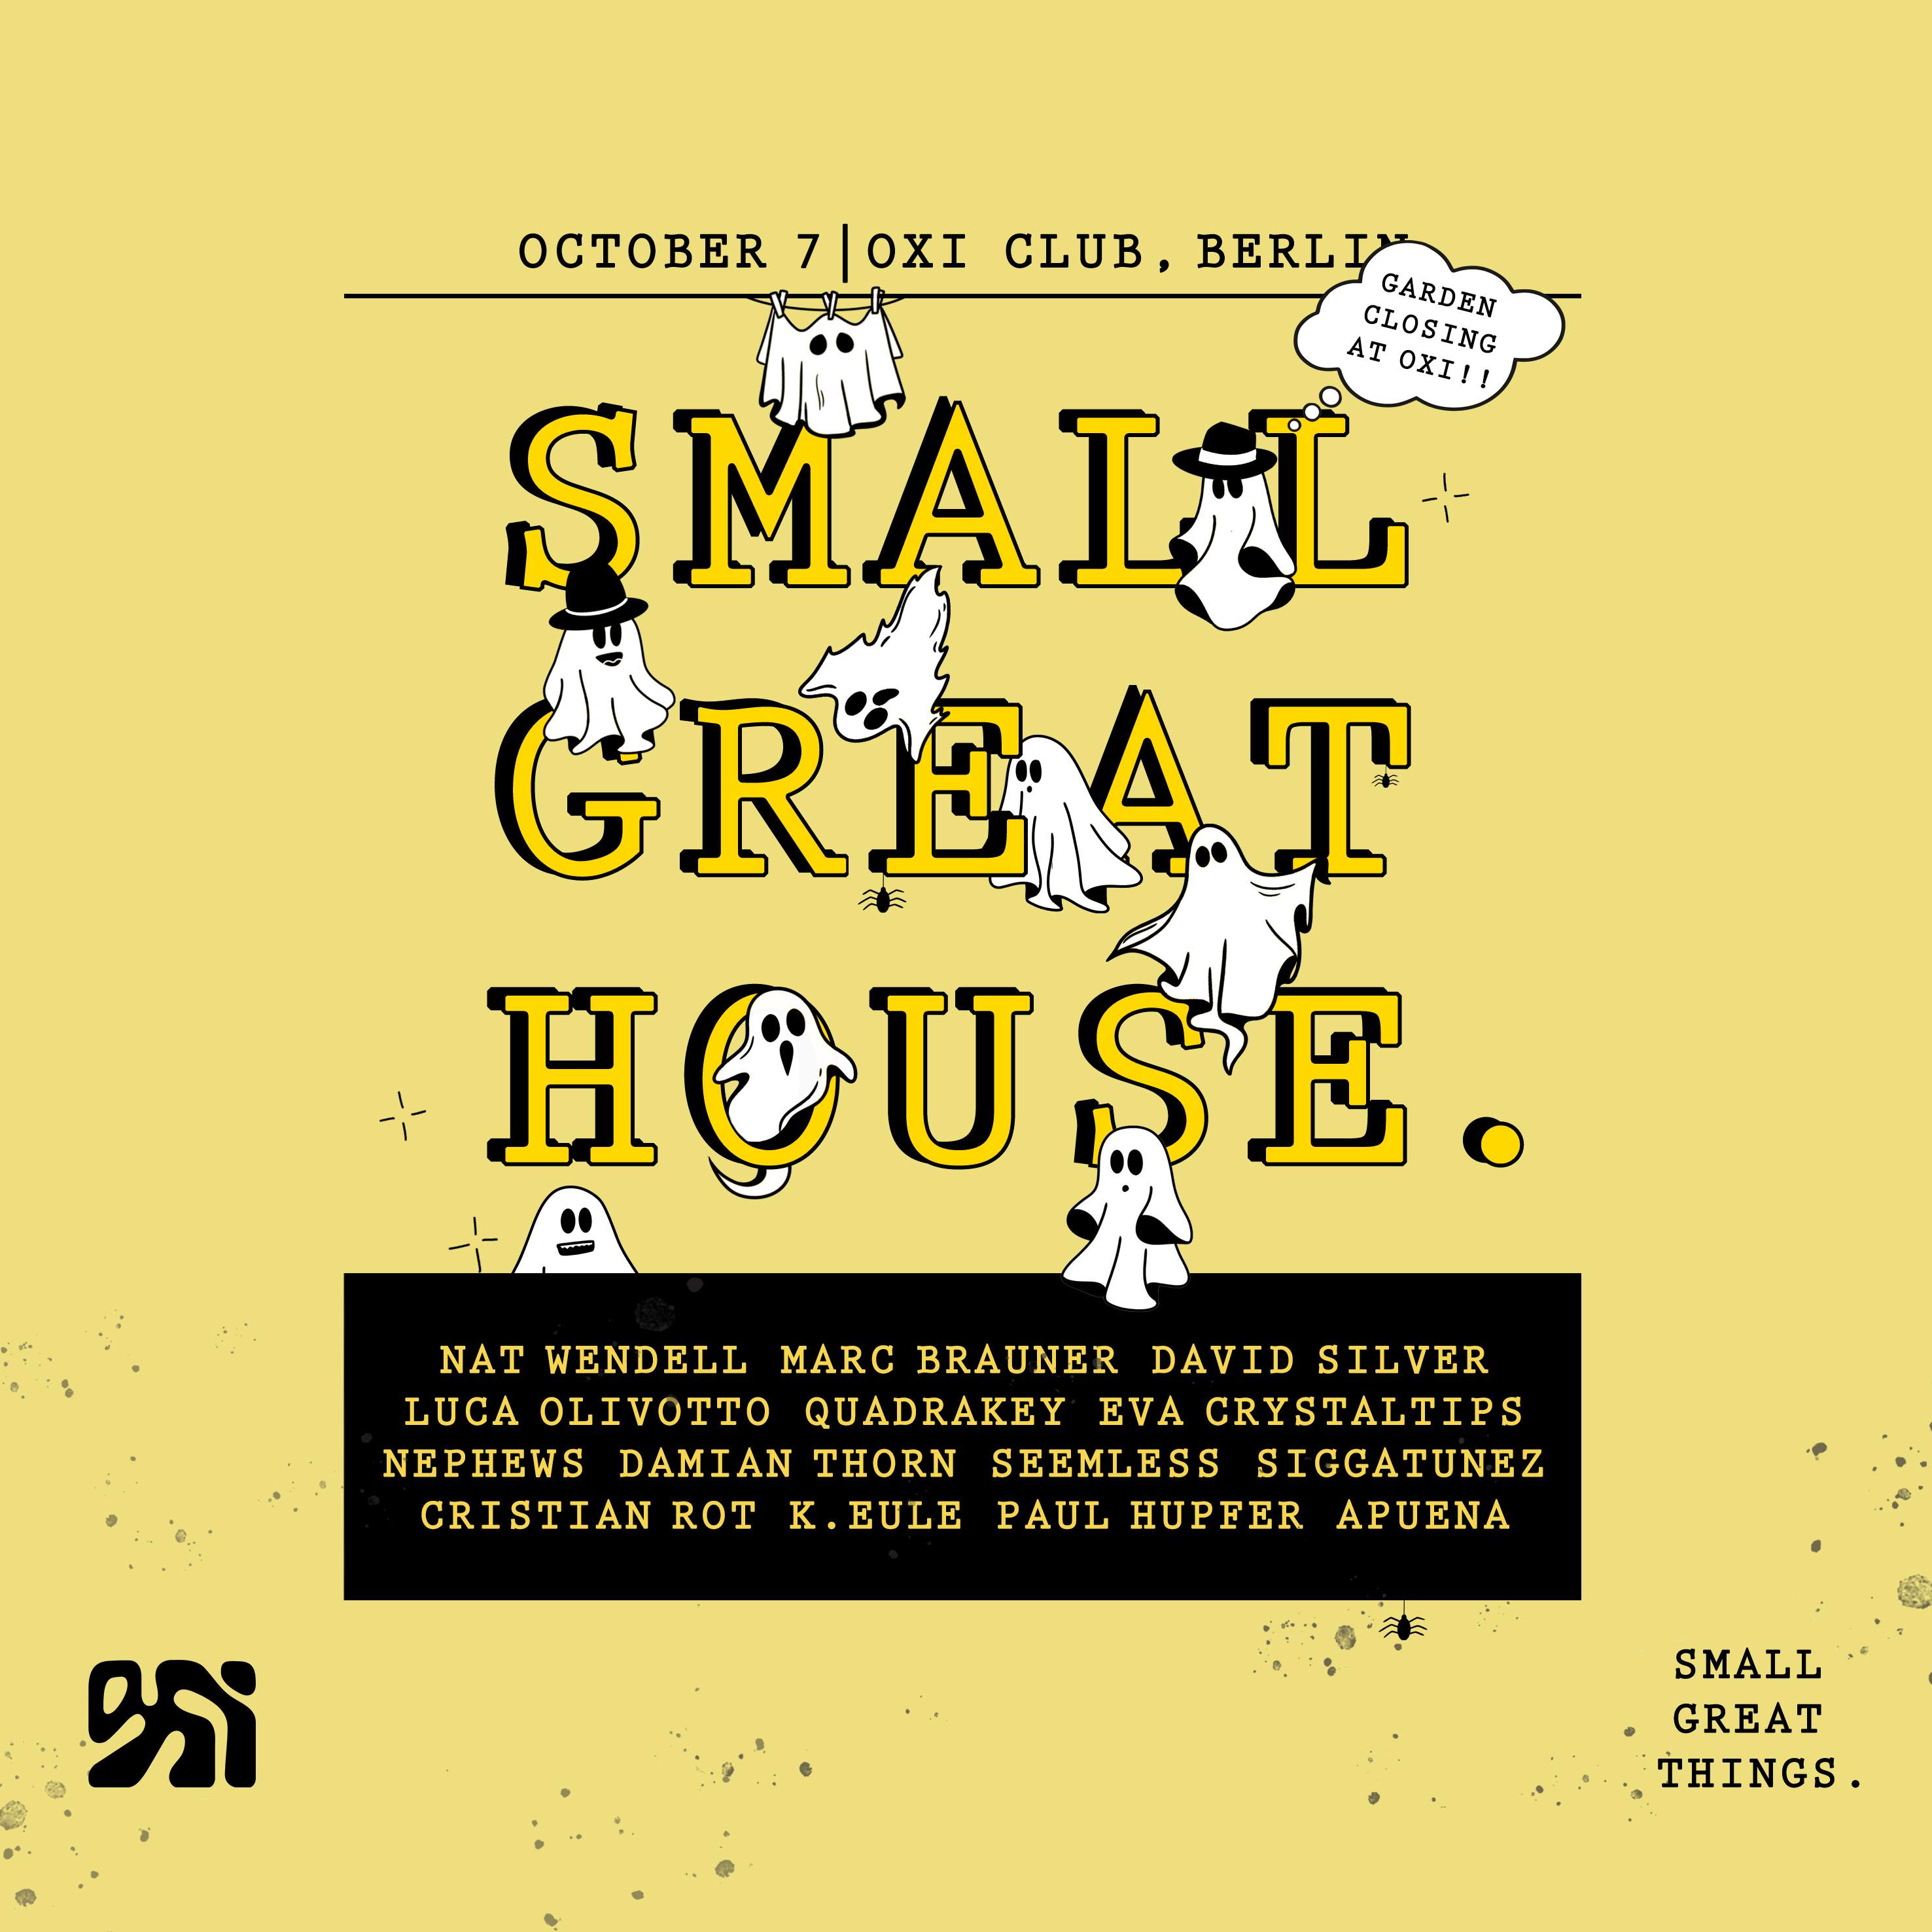 Small Great House (Small Great Things. OPEN AIR + INDOOR) Garden Closing - フライヤー裏